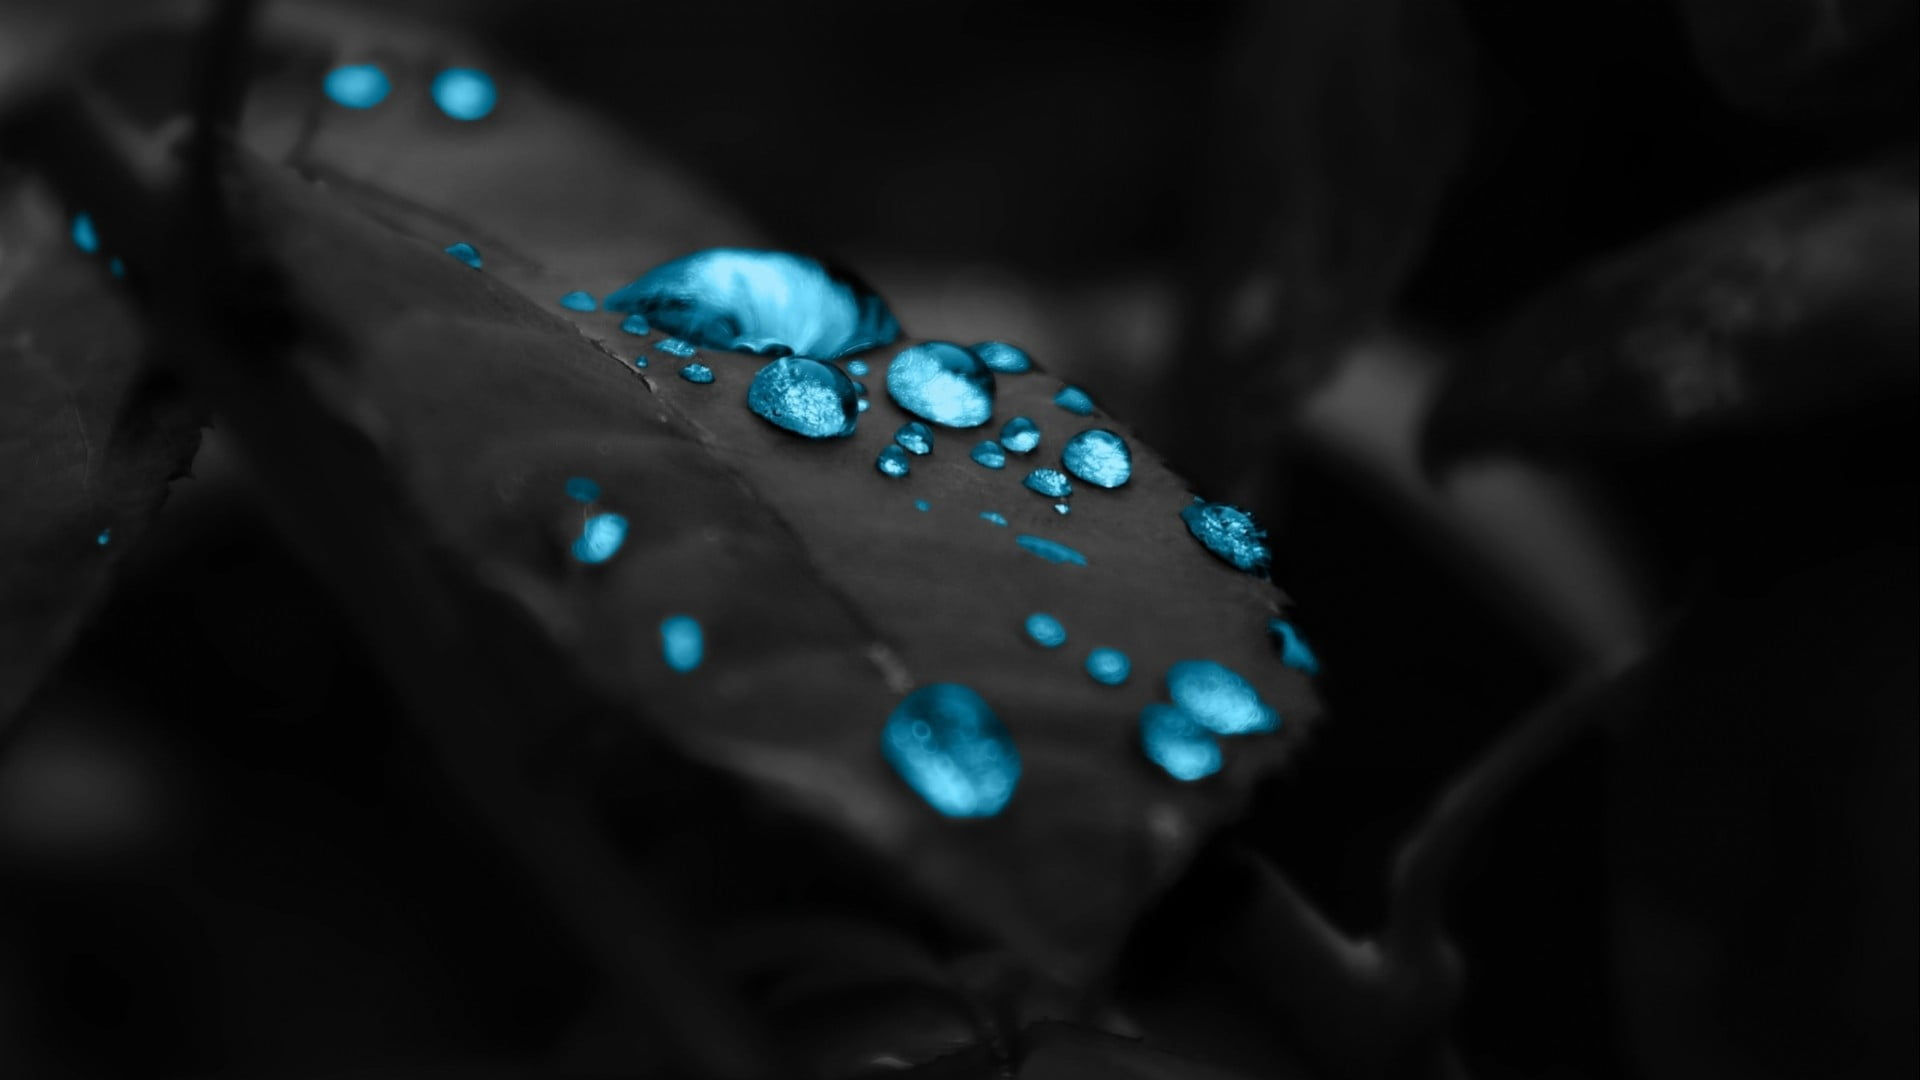 Blue water dew wallpaper, shallow focus photography of blue gemstone